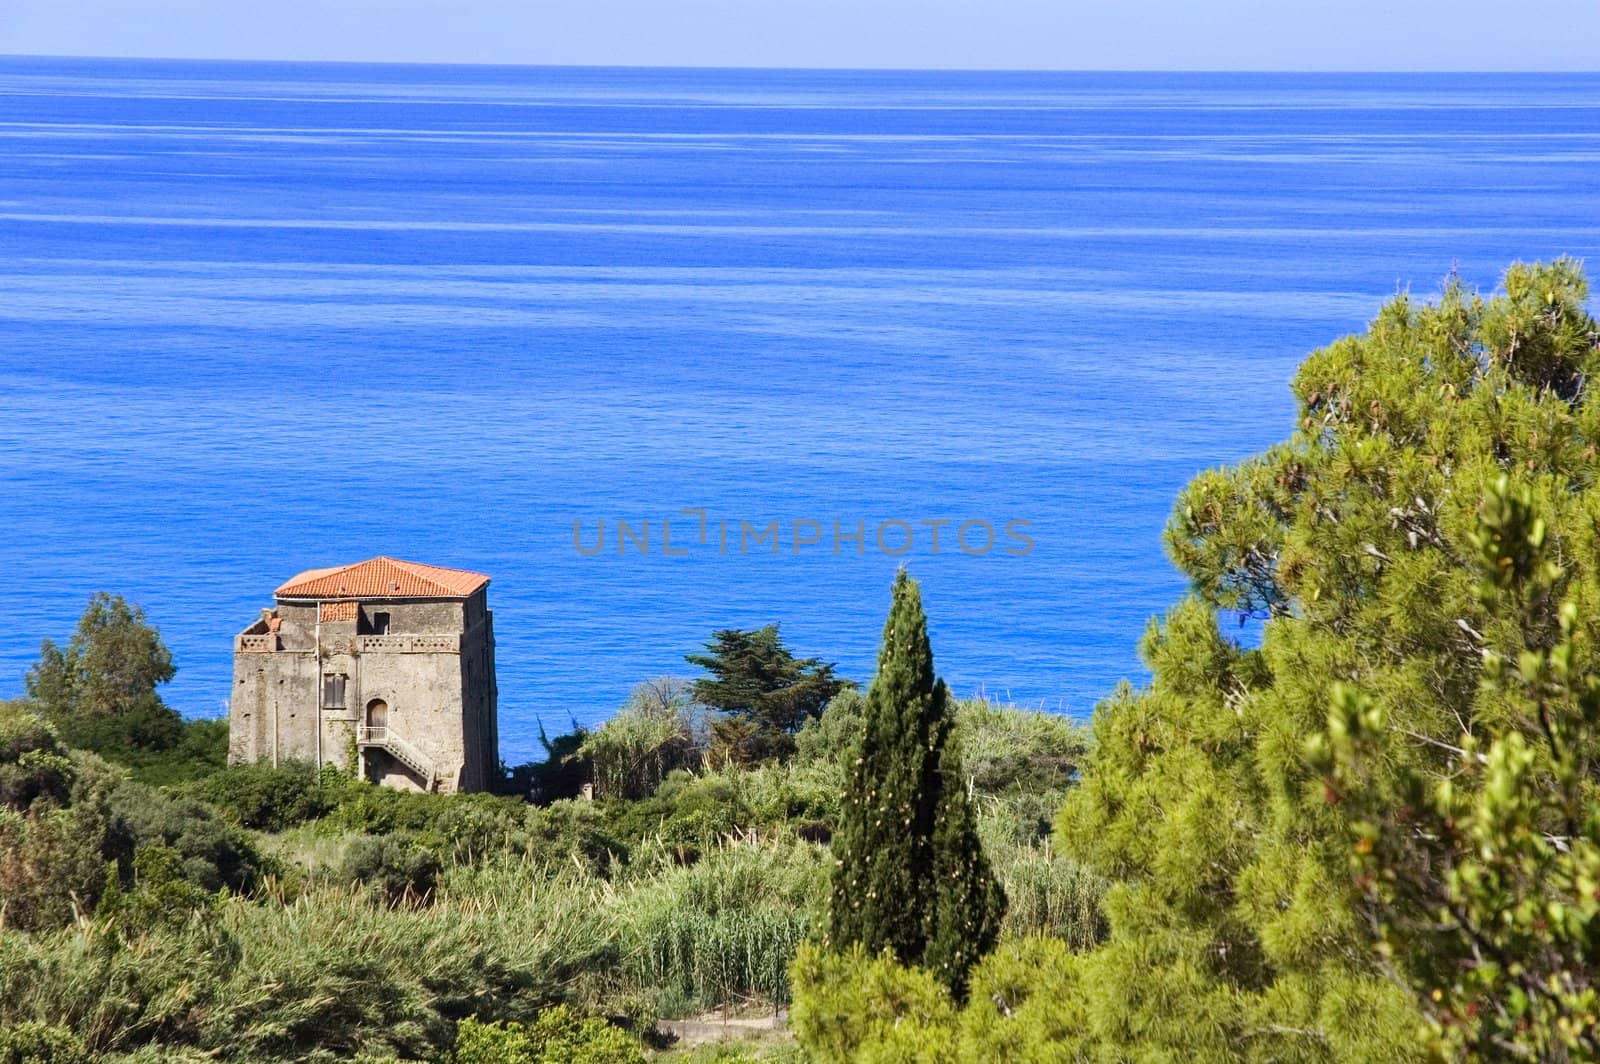 Mediterranean view with ancient tower and lush vegetation